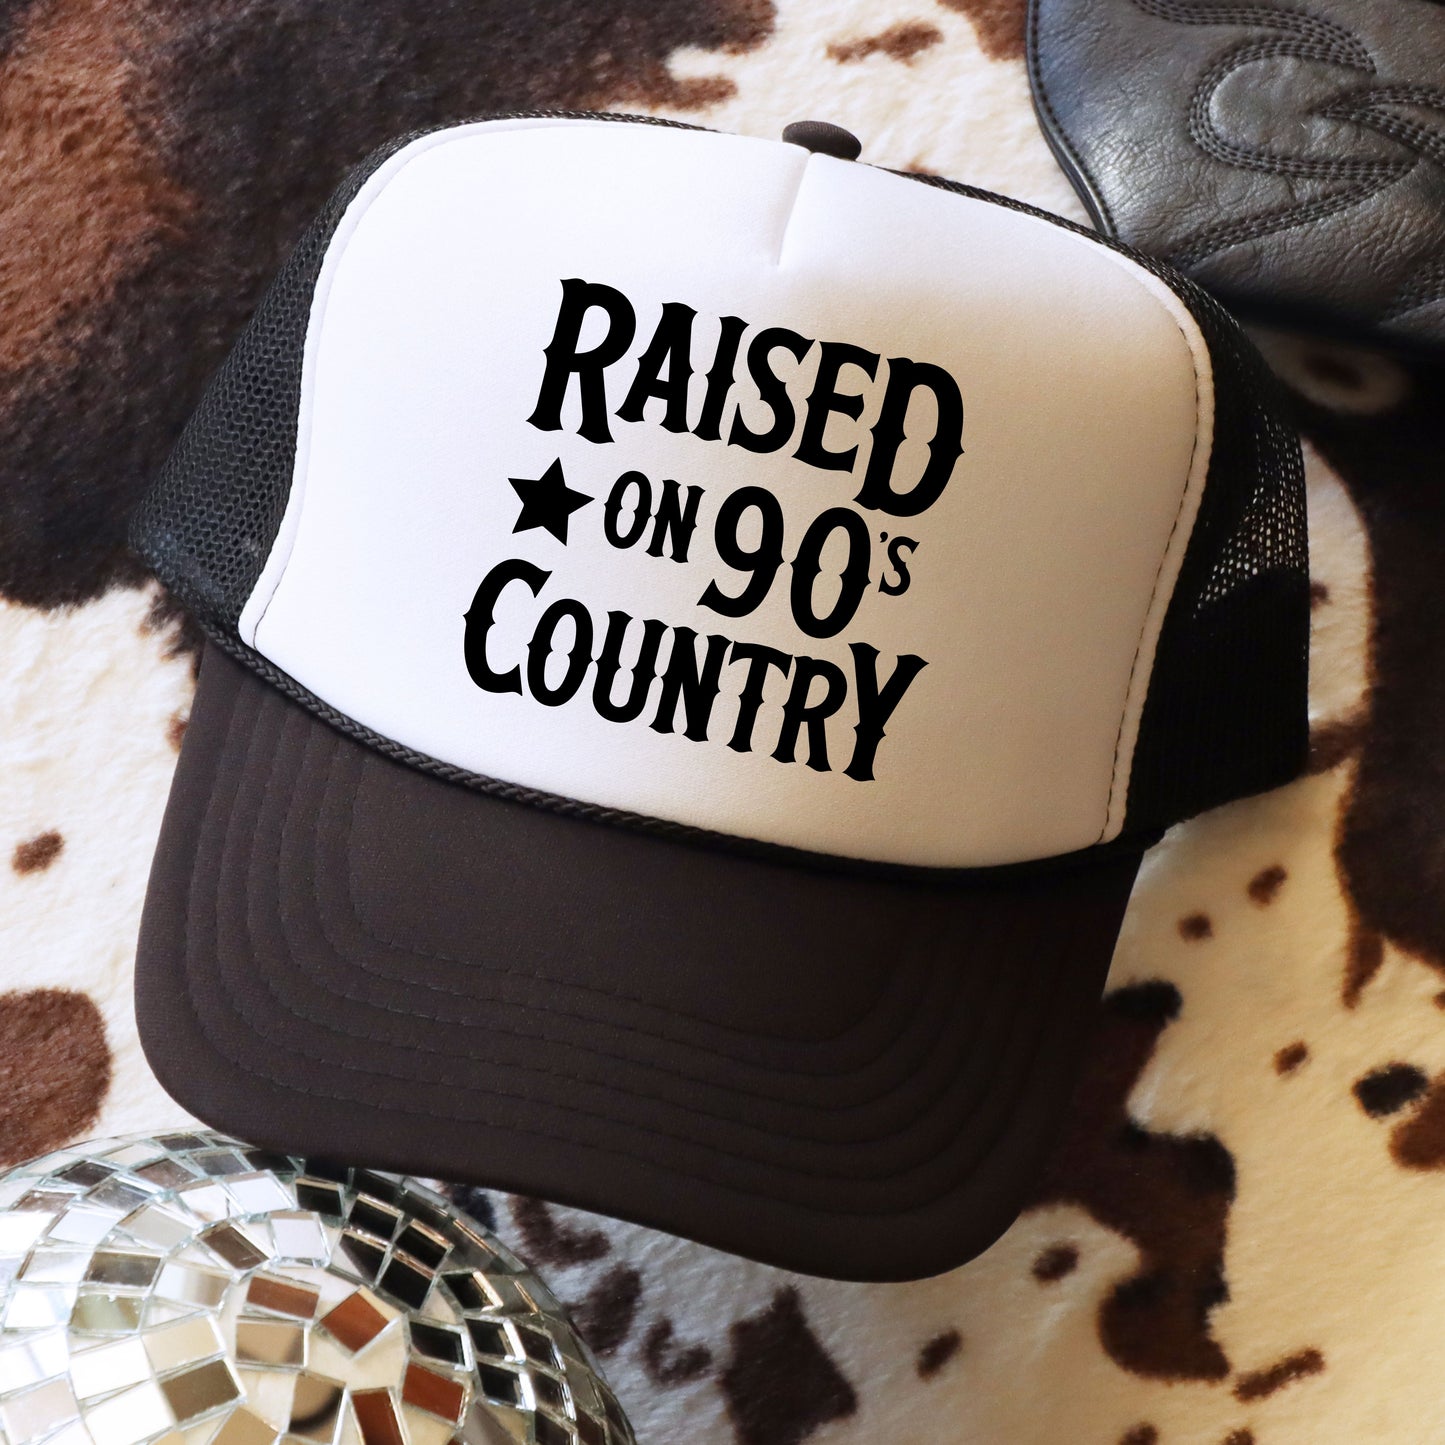 RAISED ON 90S COUNTRY Trucker Hat